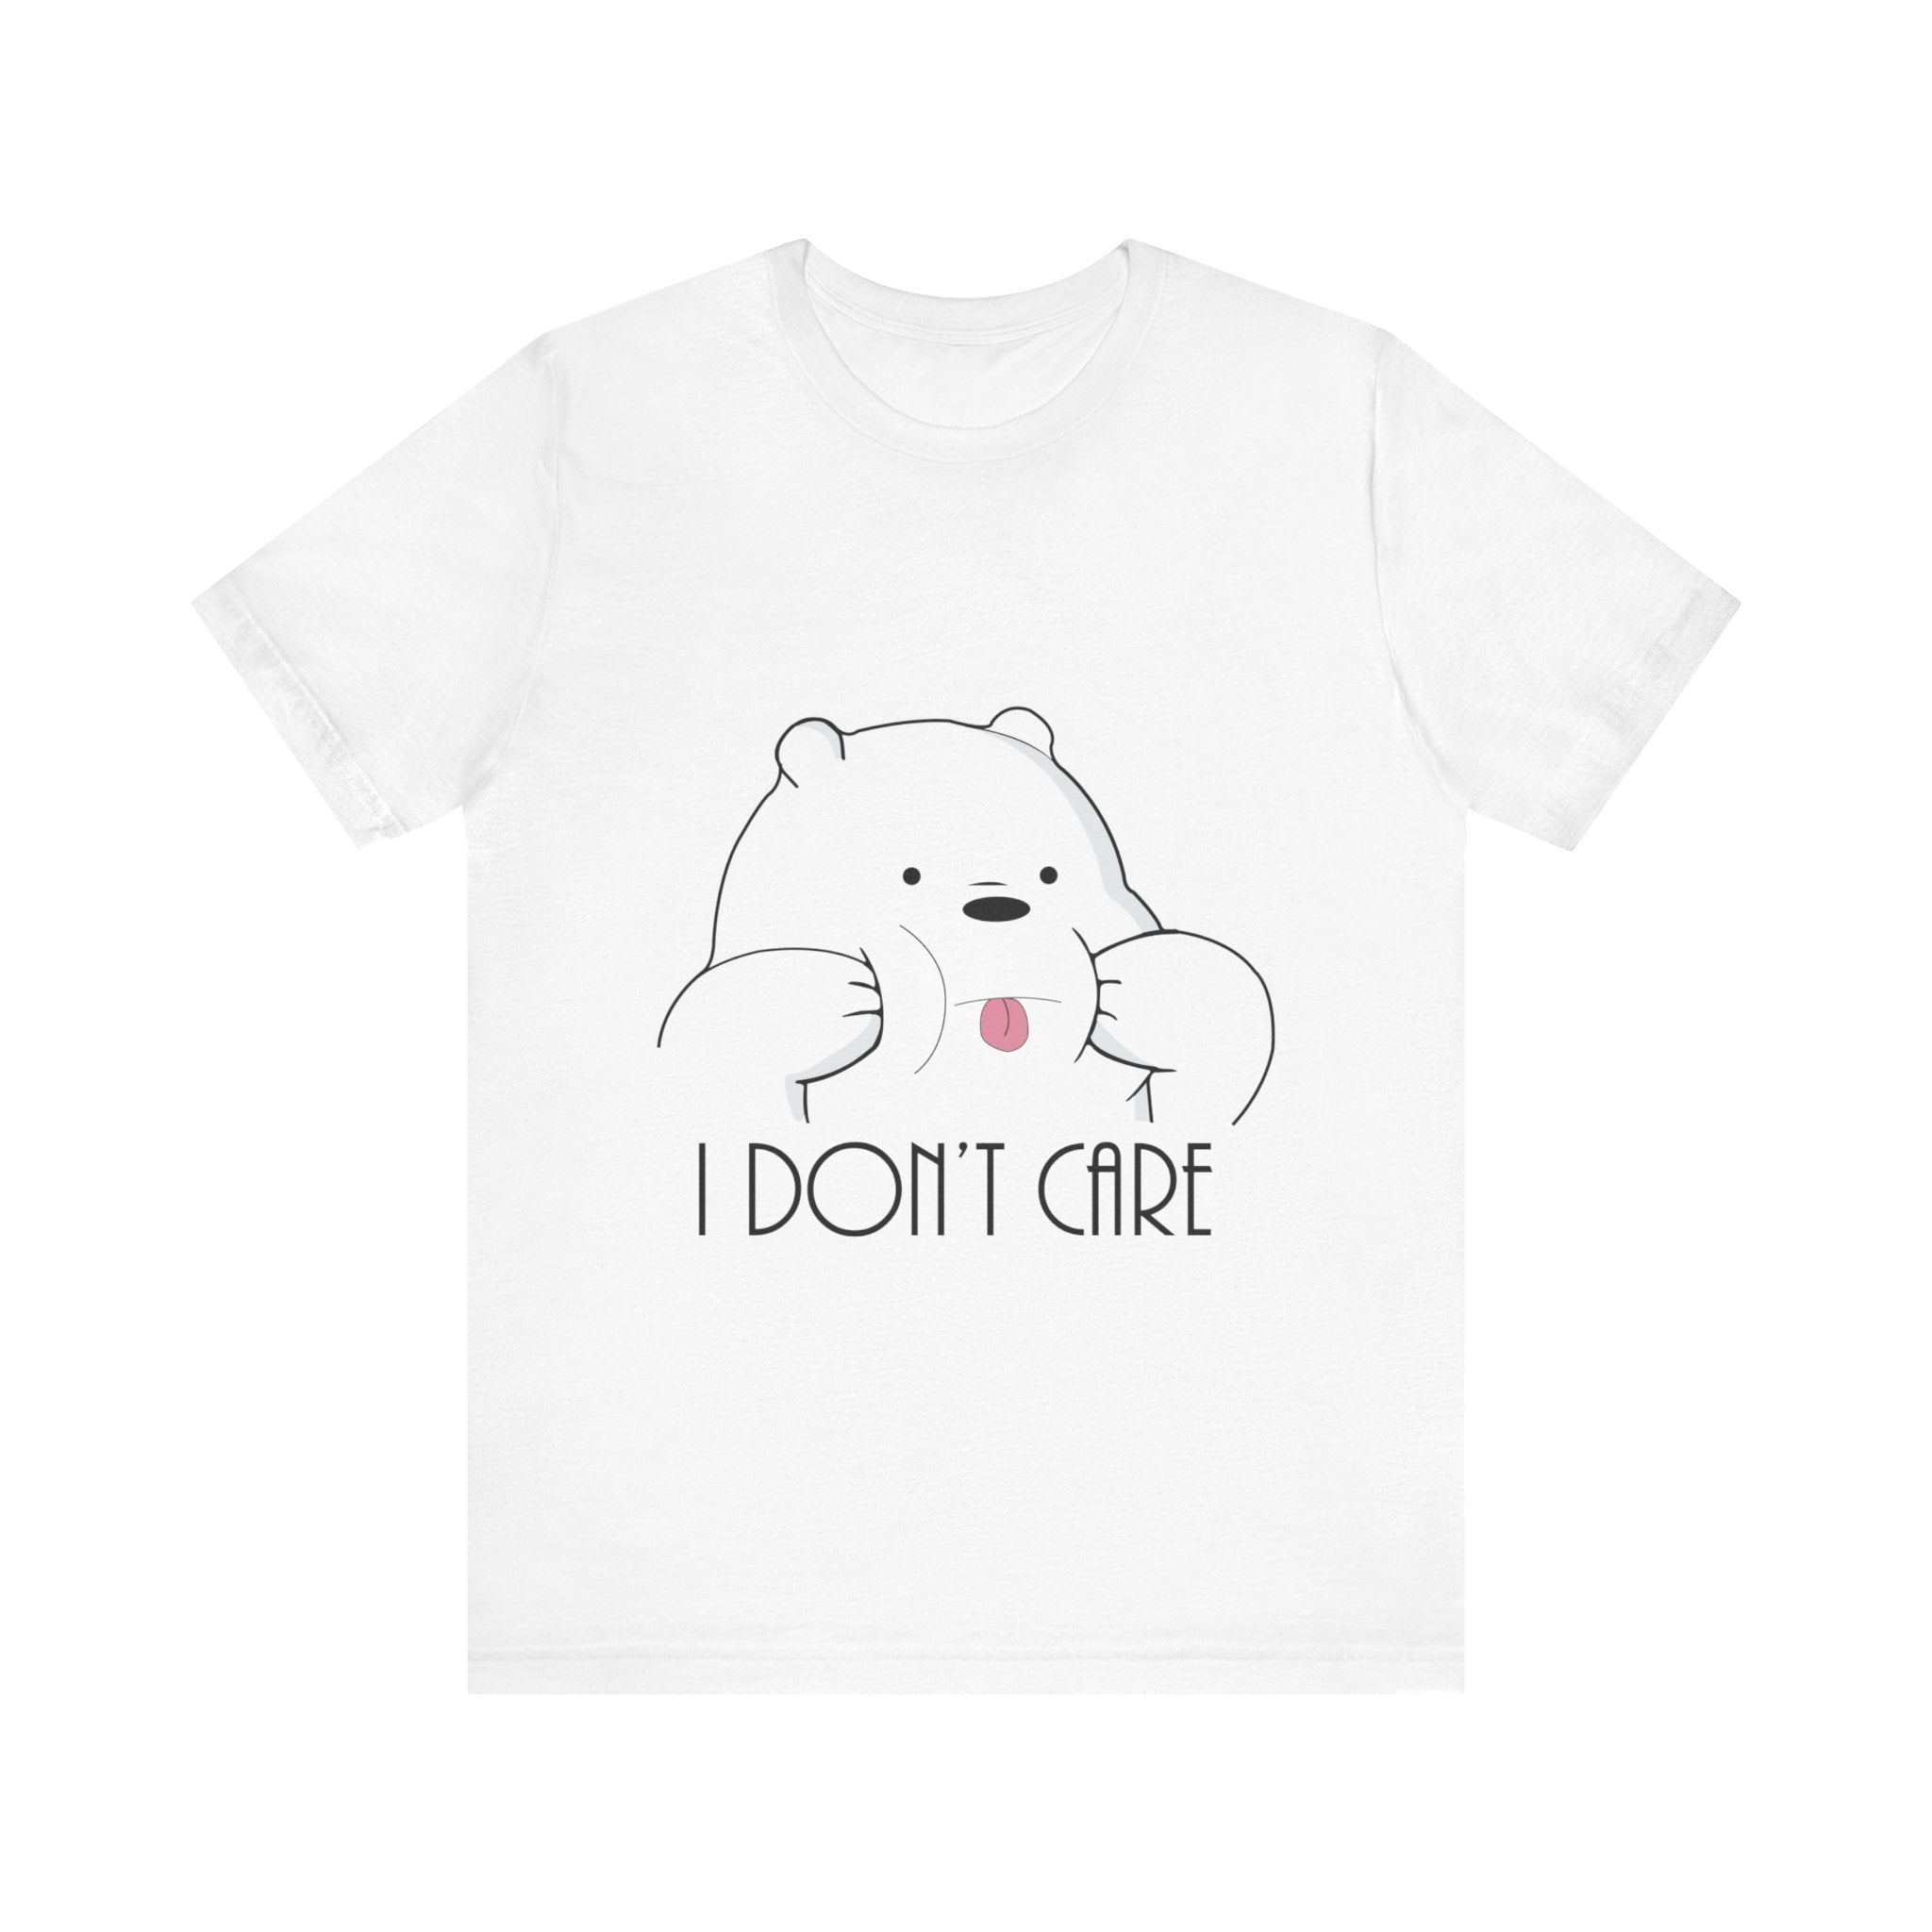 I Don't Care Panda T-Shirt with a graphic of a cartoon panda sticking out its tongue and the phrase "i don't care" printed below.